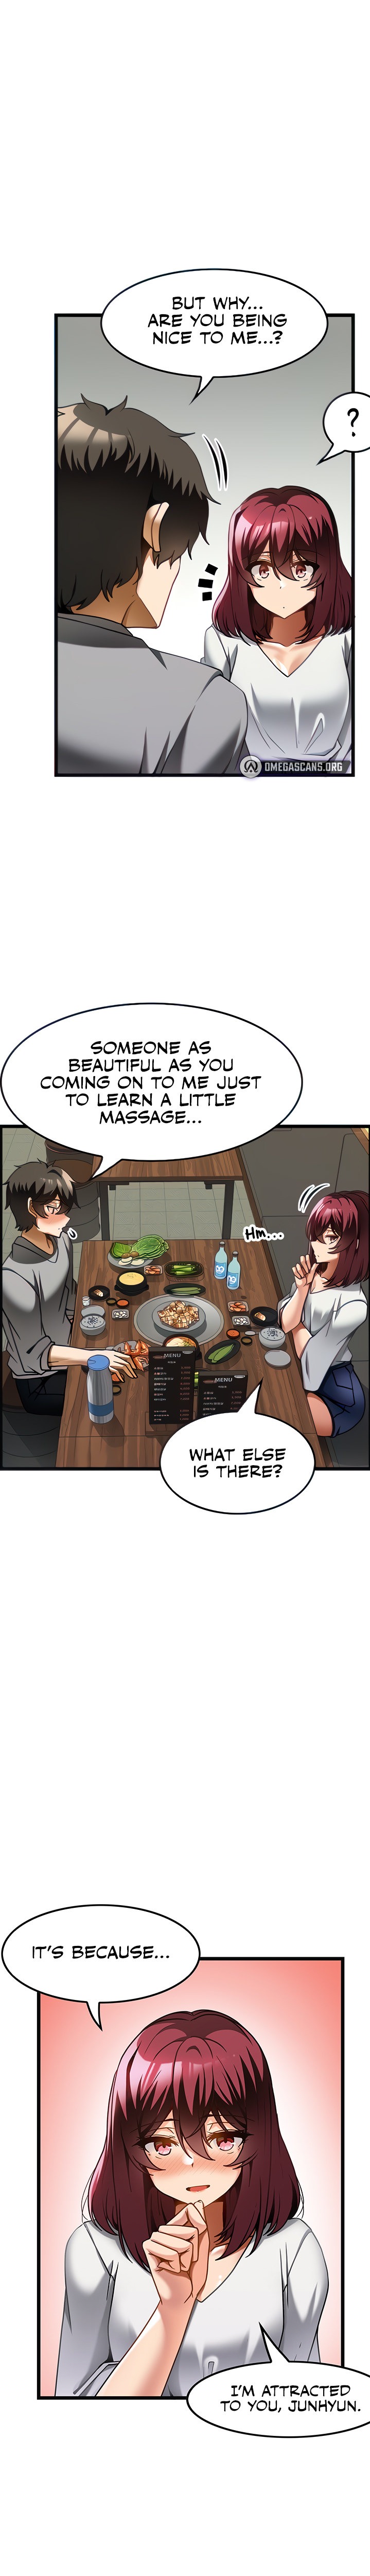 Too Good At Massages - Chapter 19 Page 9